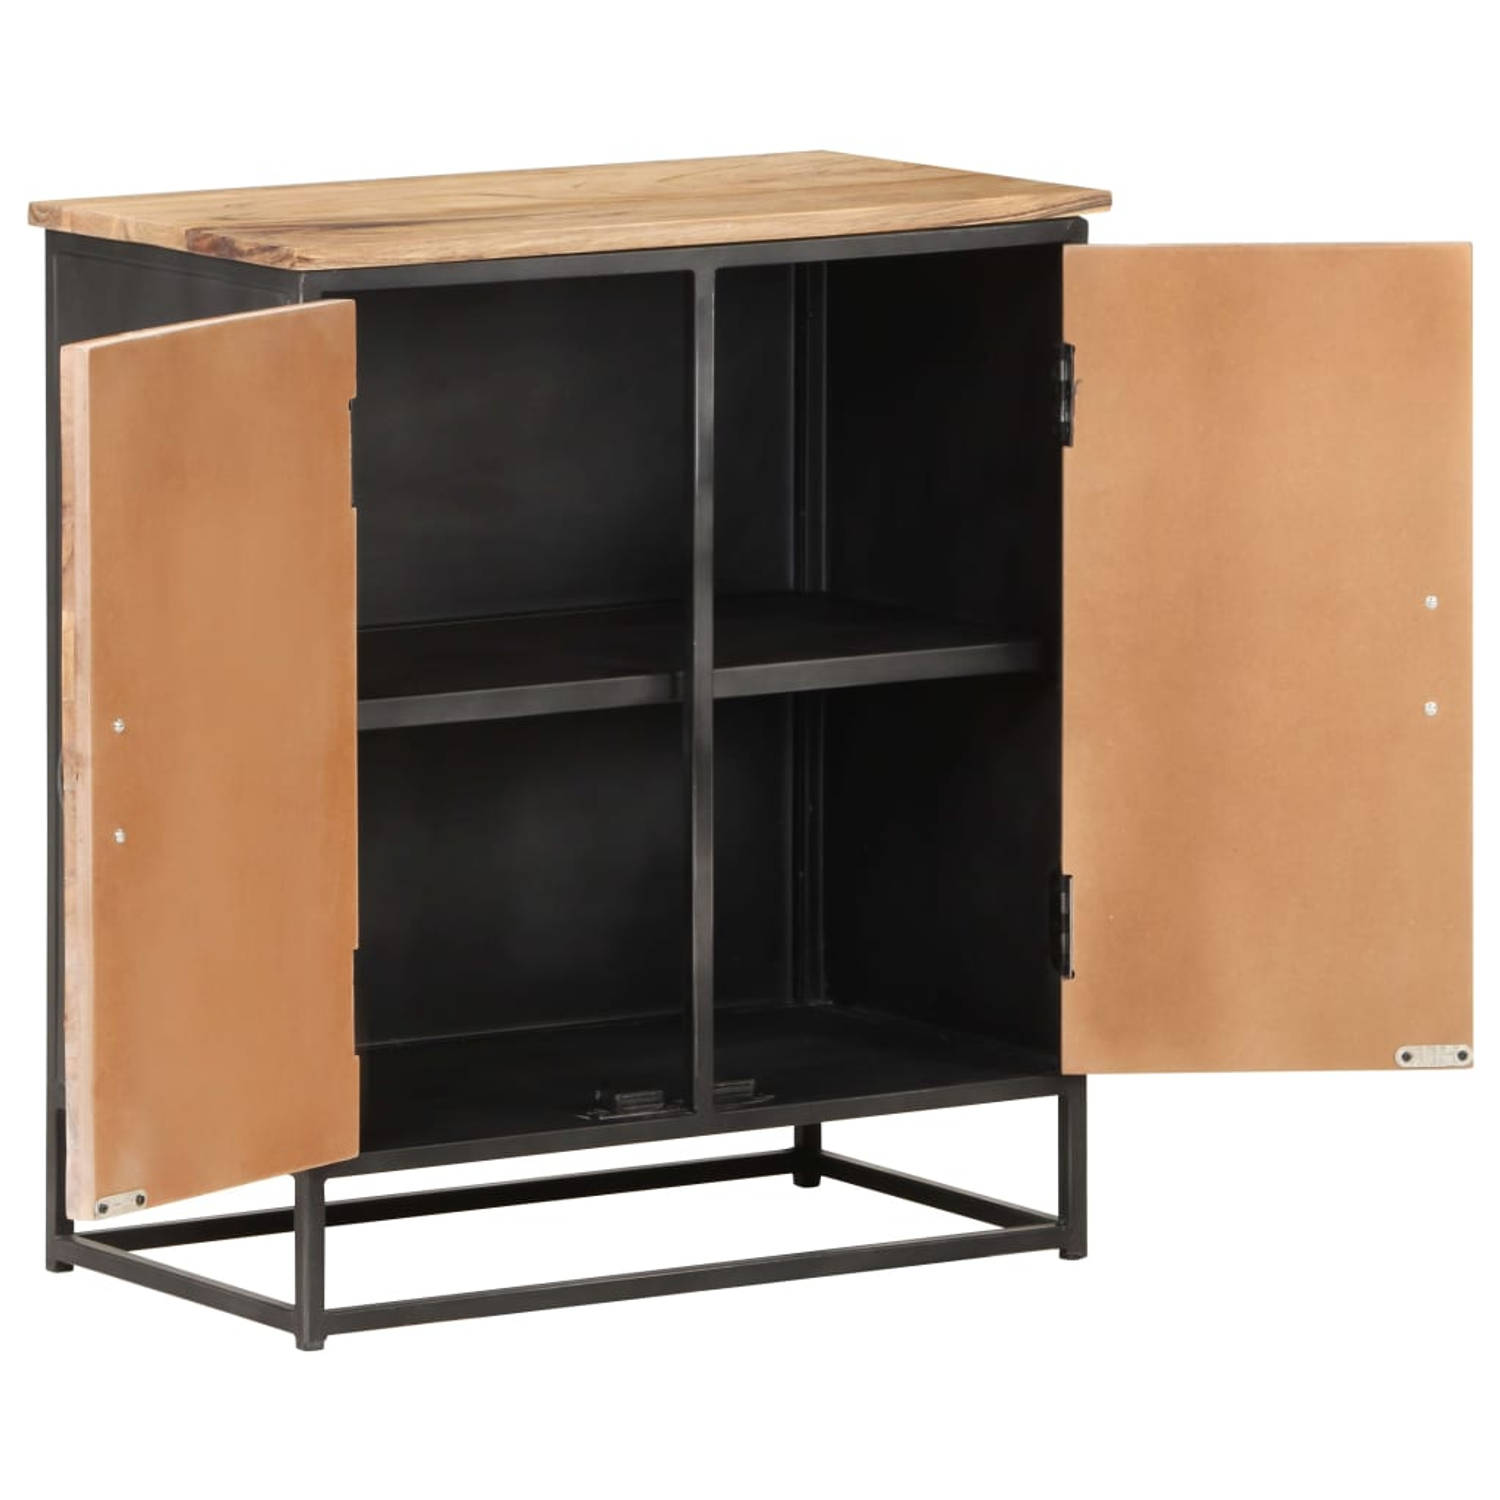 The Living Store Dressoir - Acaciahout - Staal - 60 x 35 x 70 cm - Industriële charme